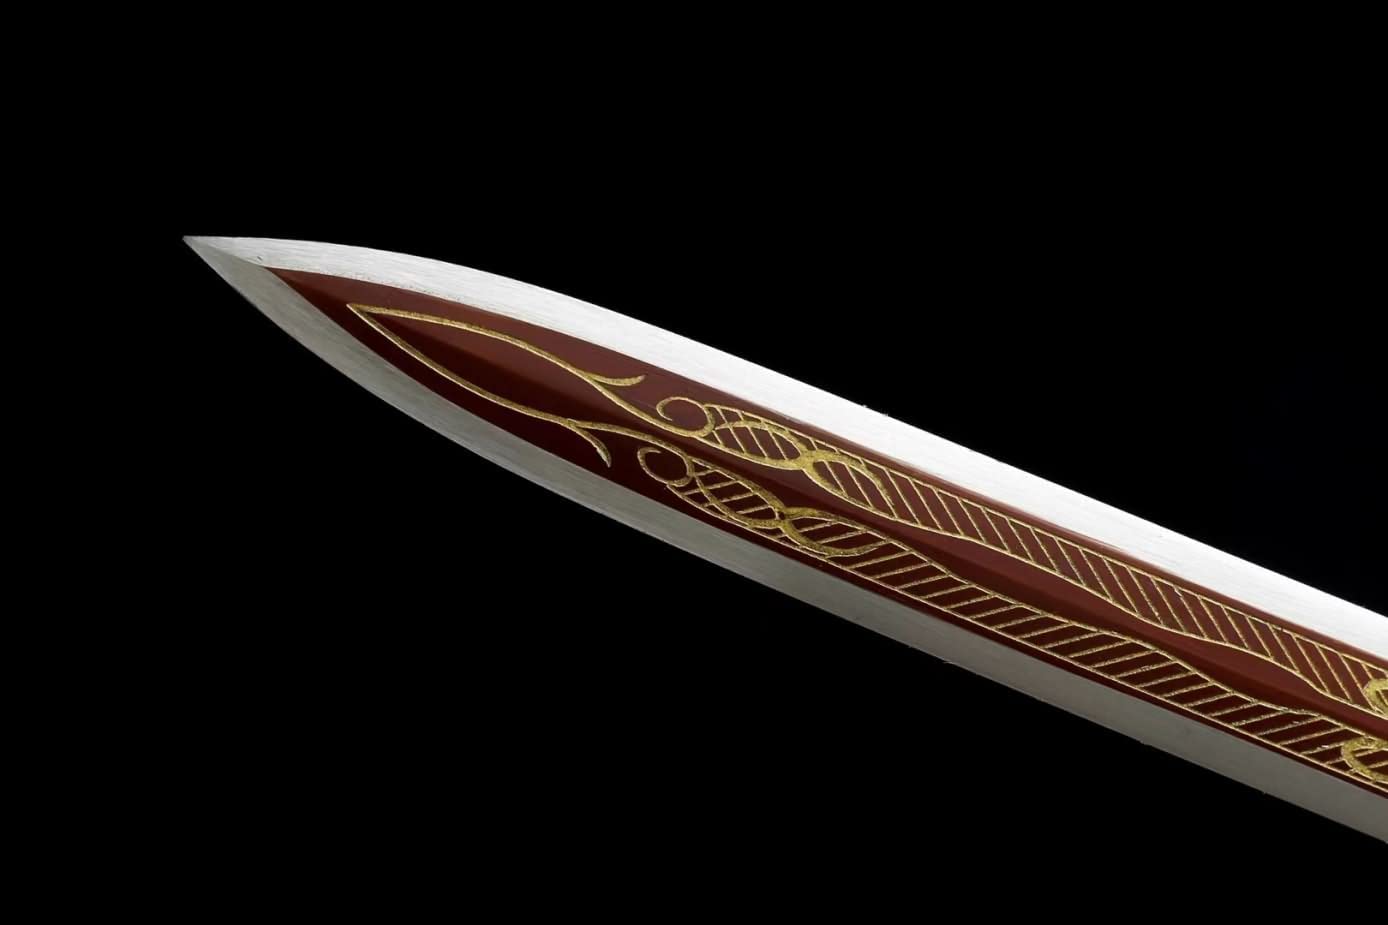 Chibi han jian,Battle Ready,Forged High Carbon Steel Blade,Alloy,Rosewood ,Chinese sword